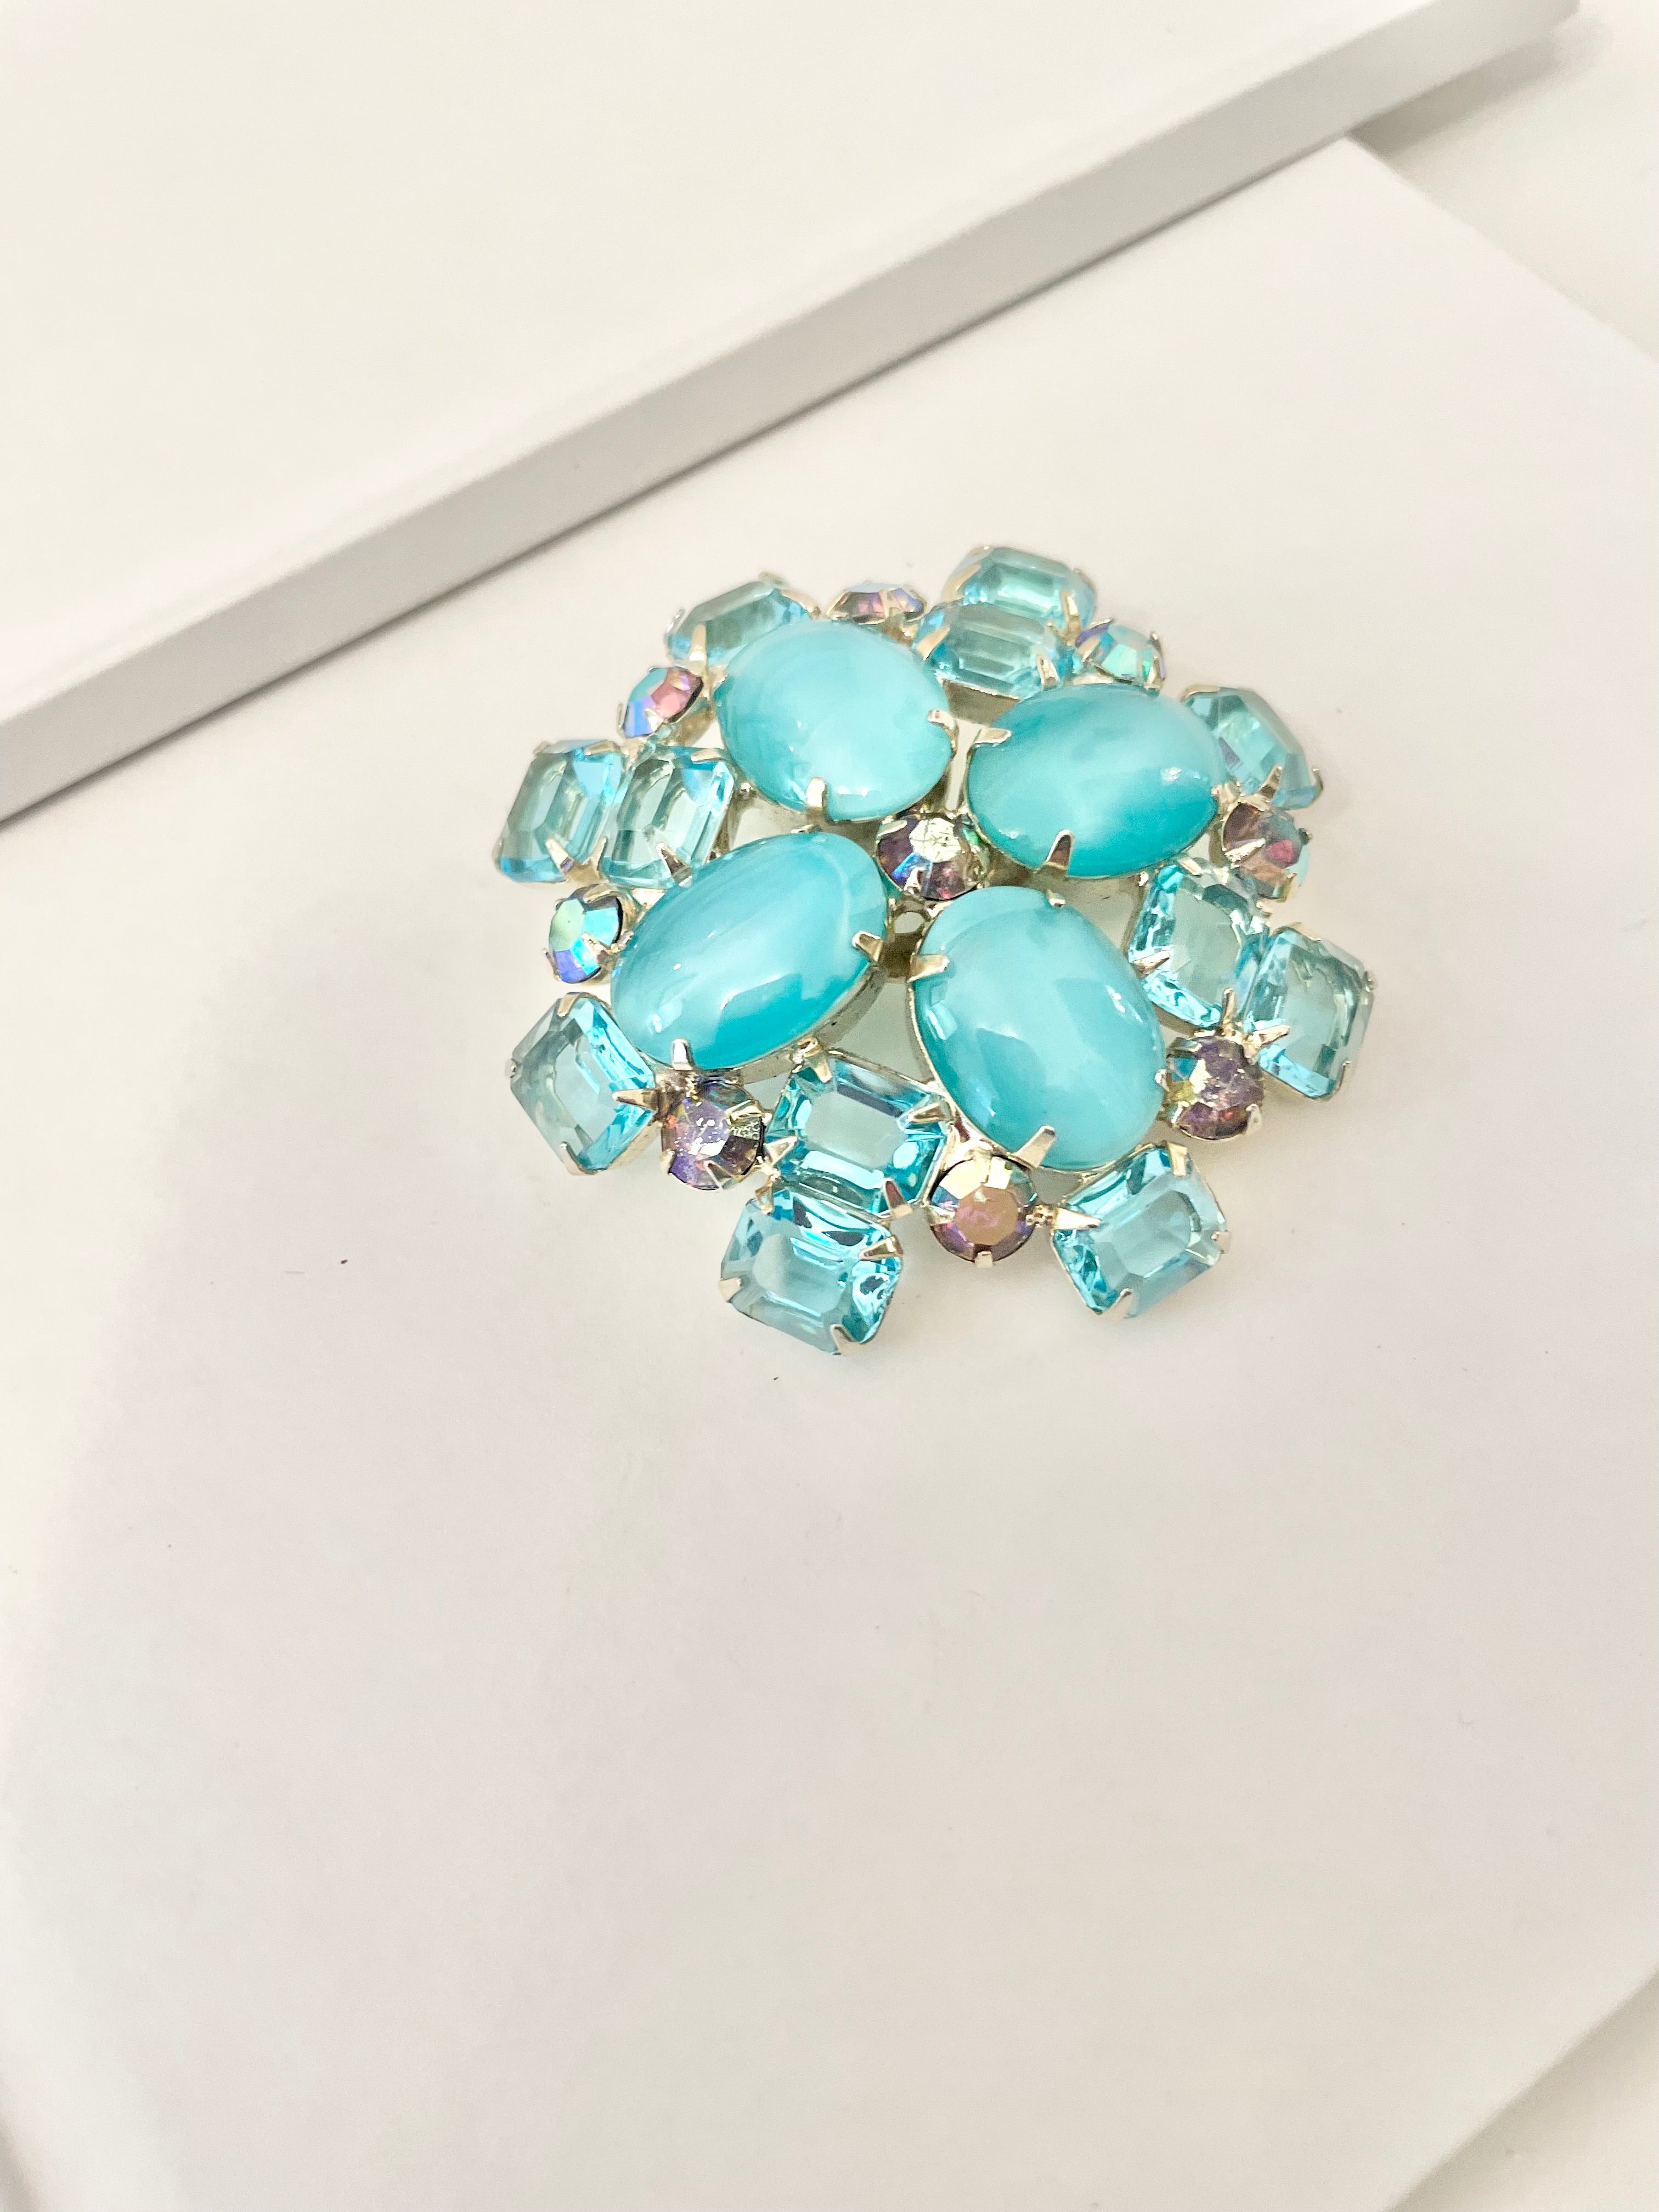 The Happy Hostess just adores all colors... This stunning 1960's glass brooch is just divine!